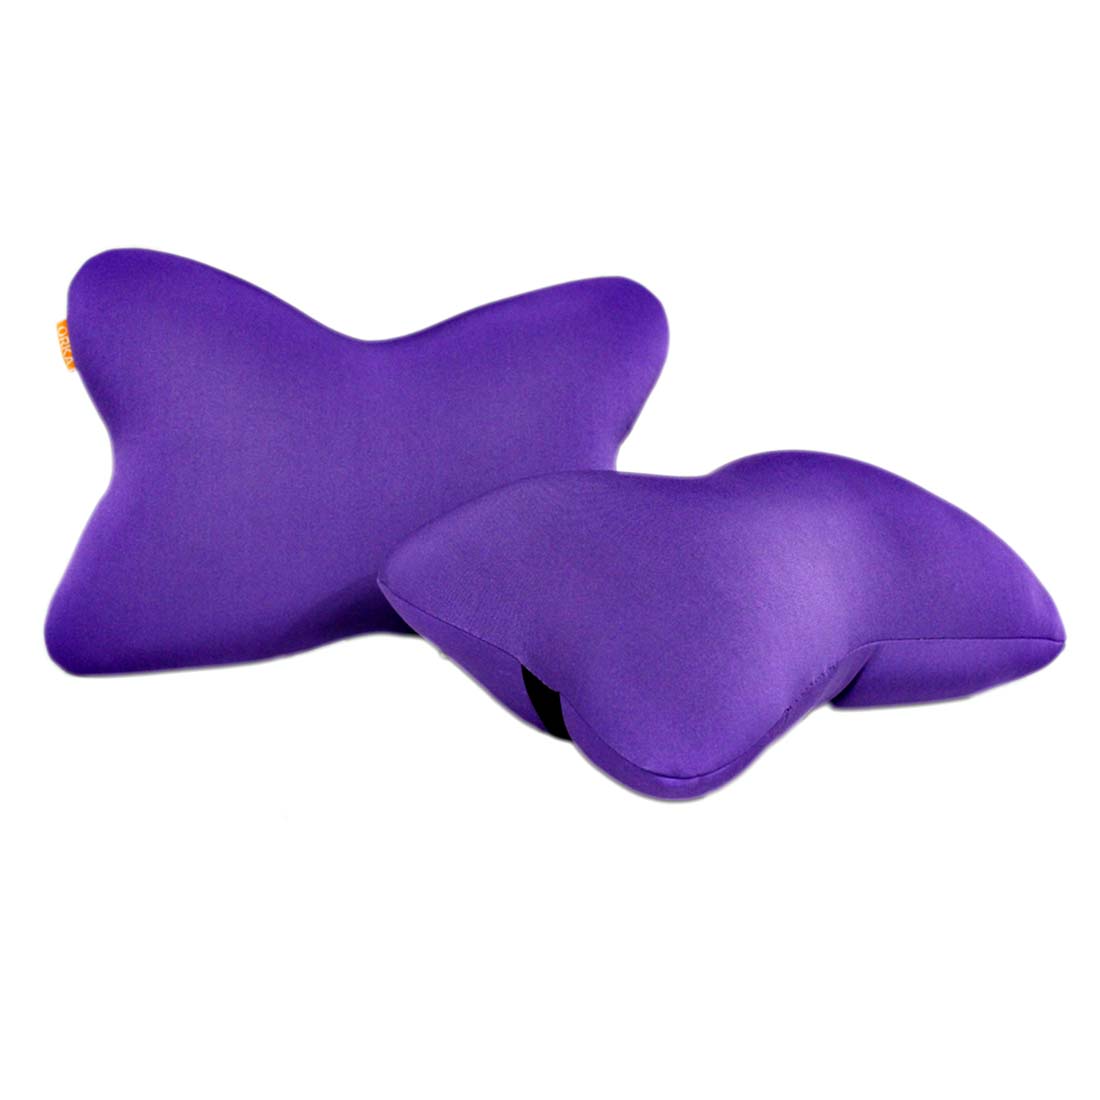 ORKA Classic Car Neckrest Pillow Filled With Microbeads [Pack Of 2] - Purple  